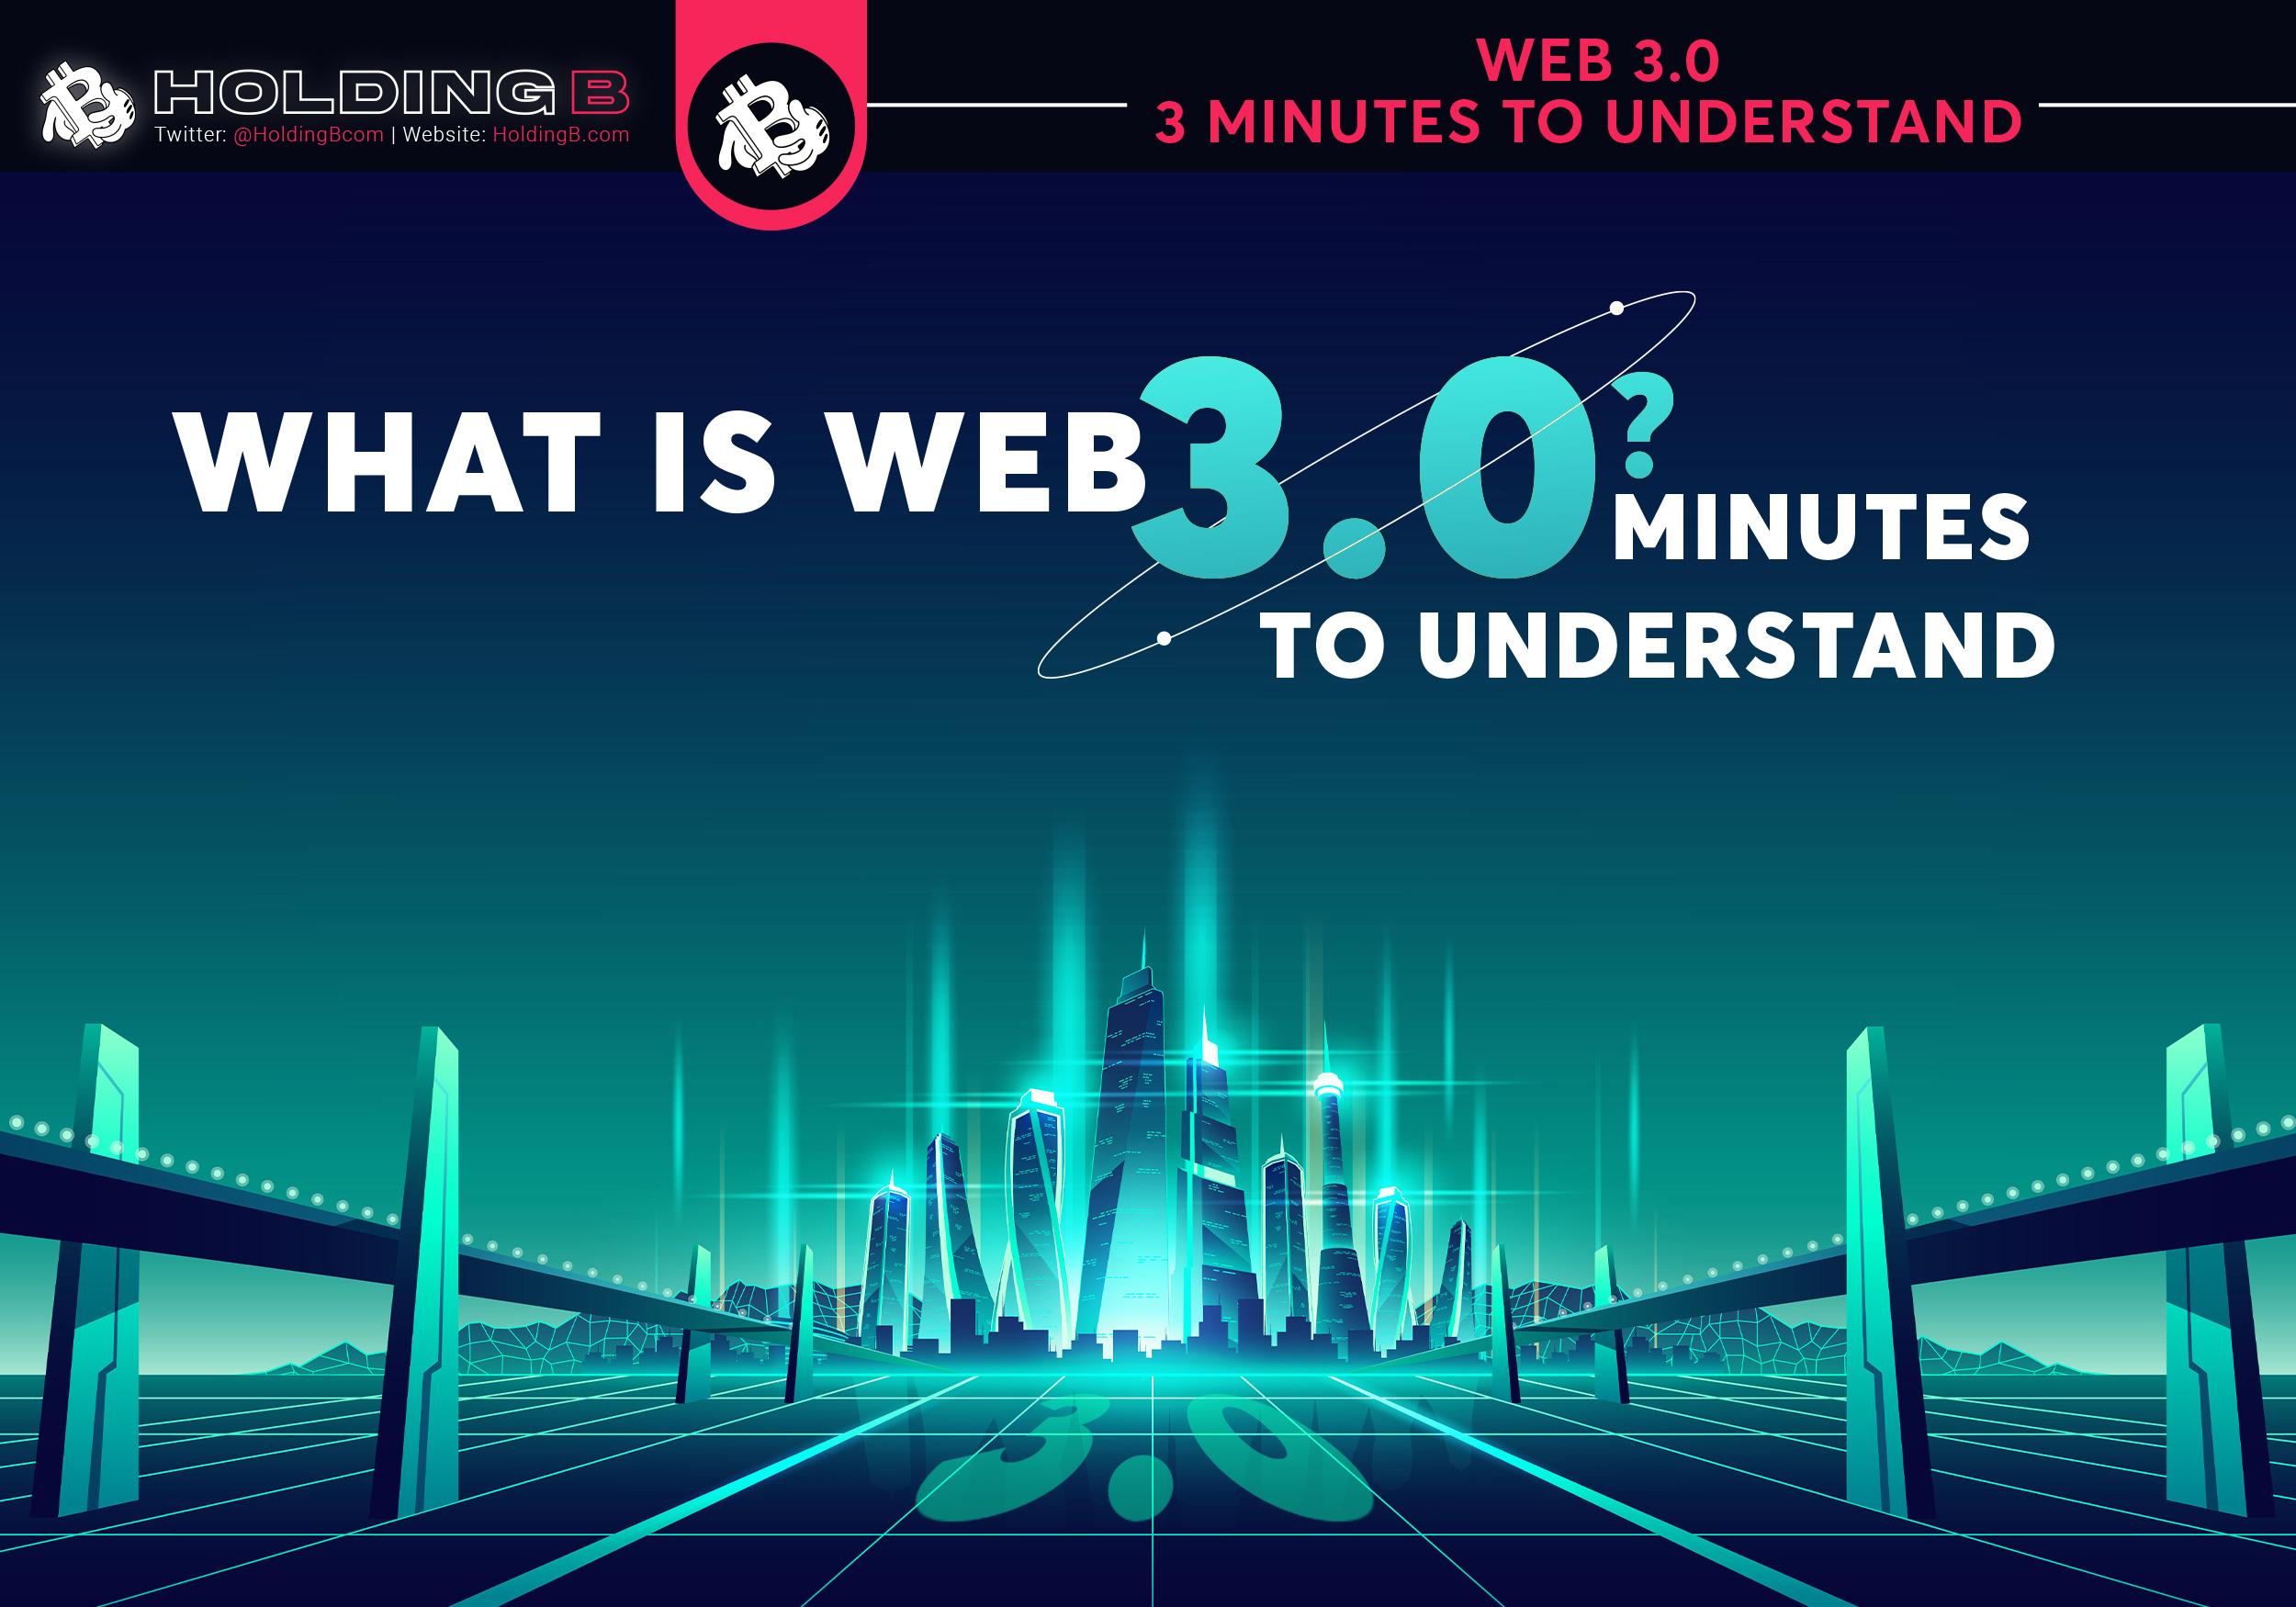 WHAT IS WEB 3.0? THREE MINUTES TO UNDERSTAND